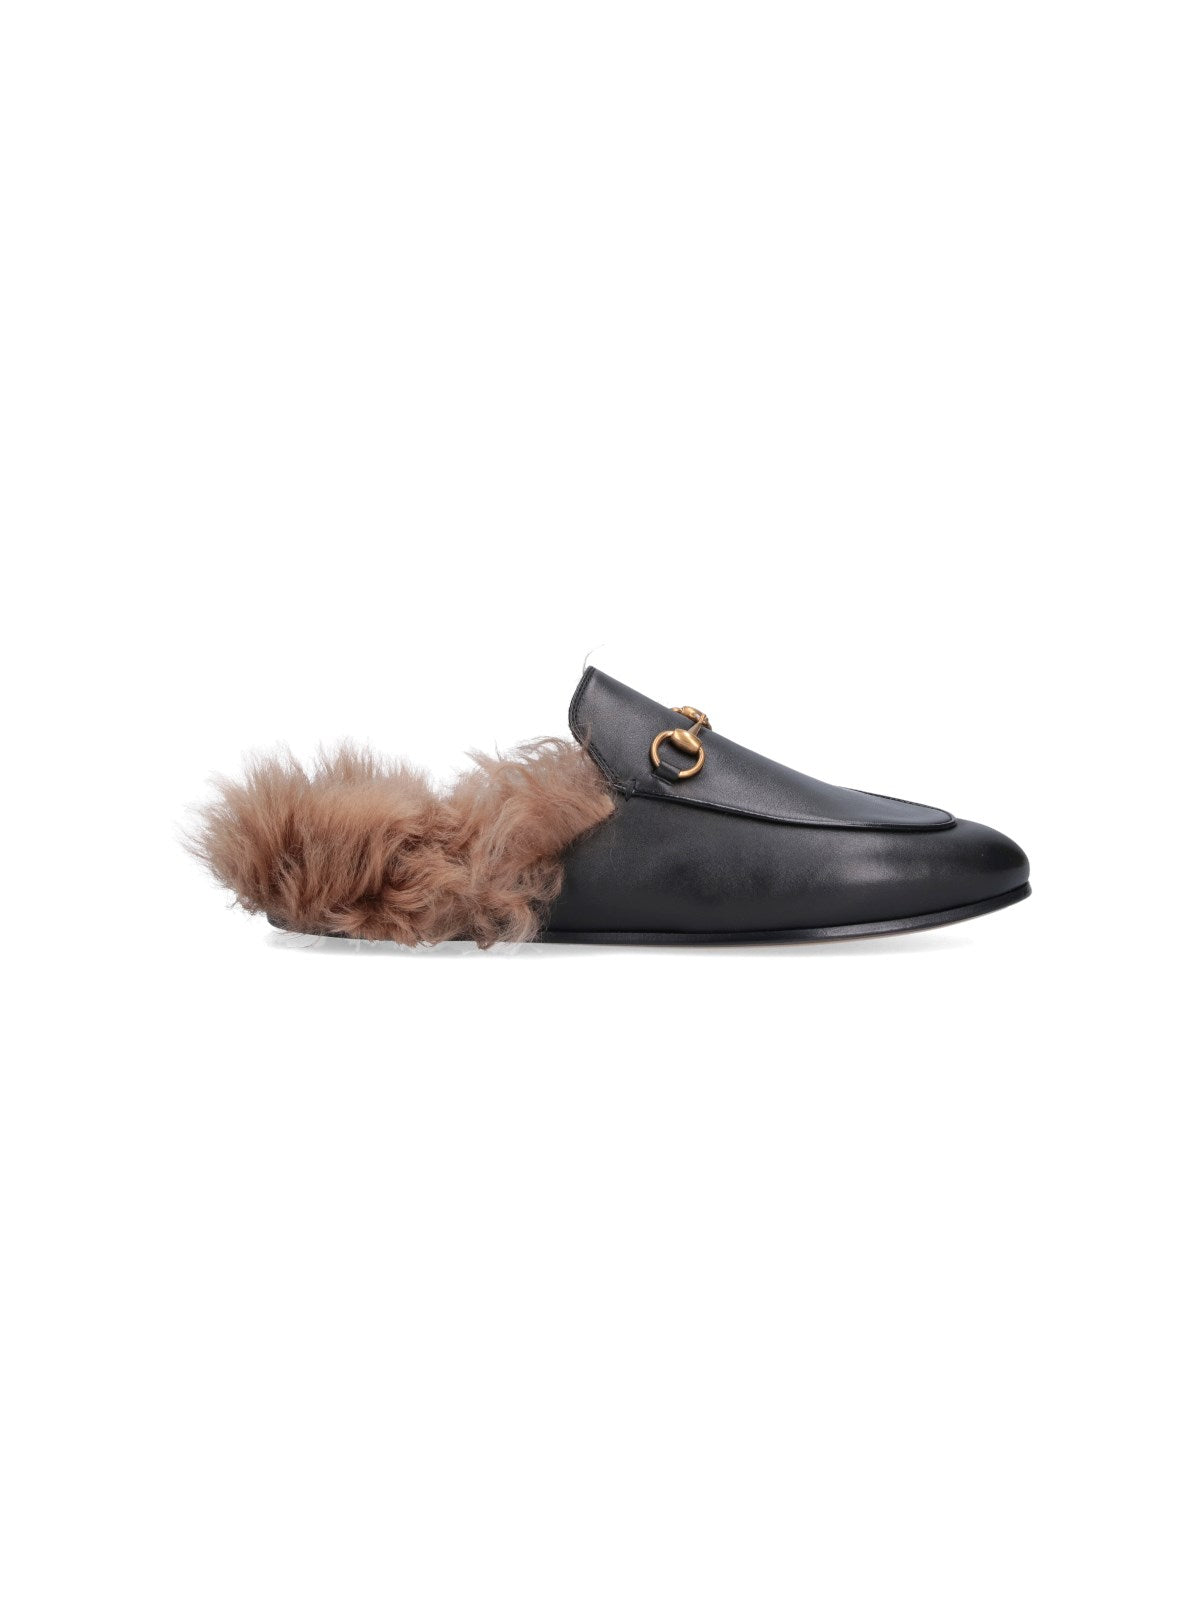 gucci mules "2015 re-edition princetwon"